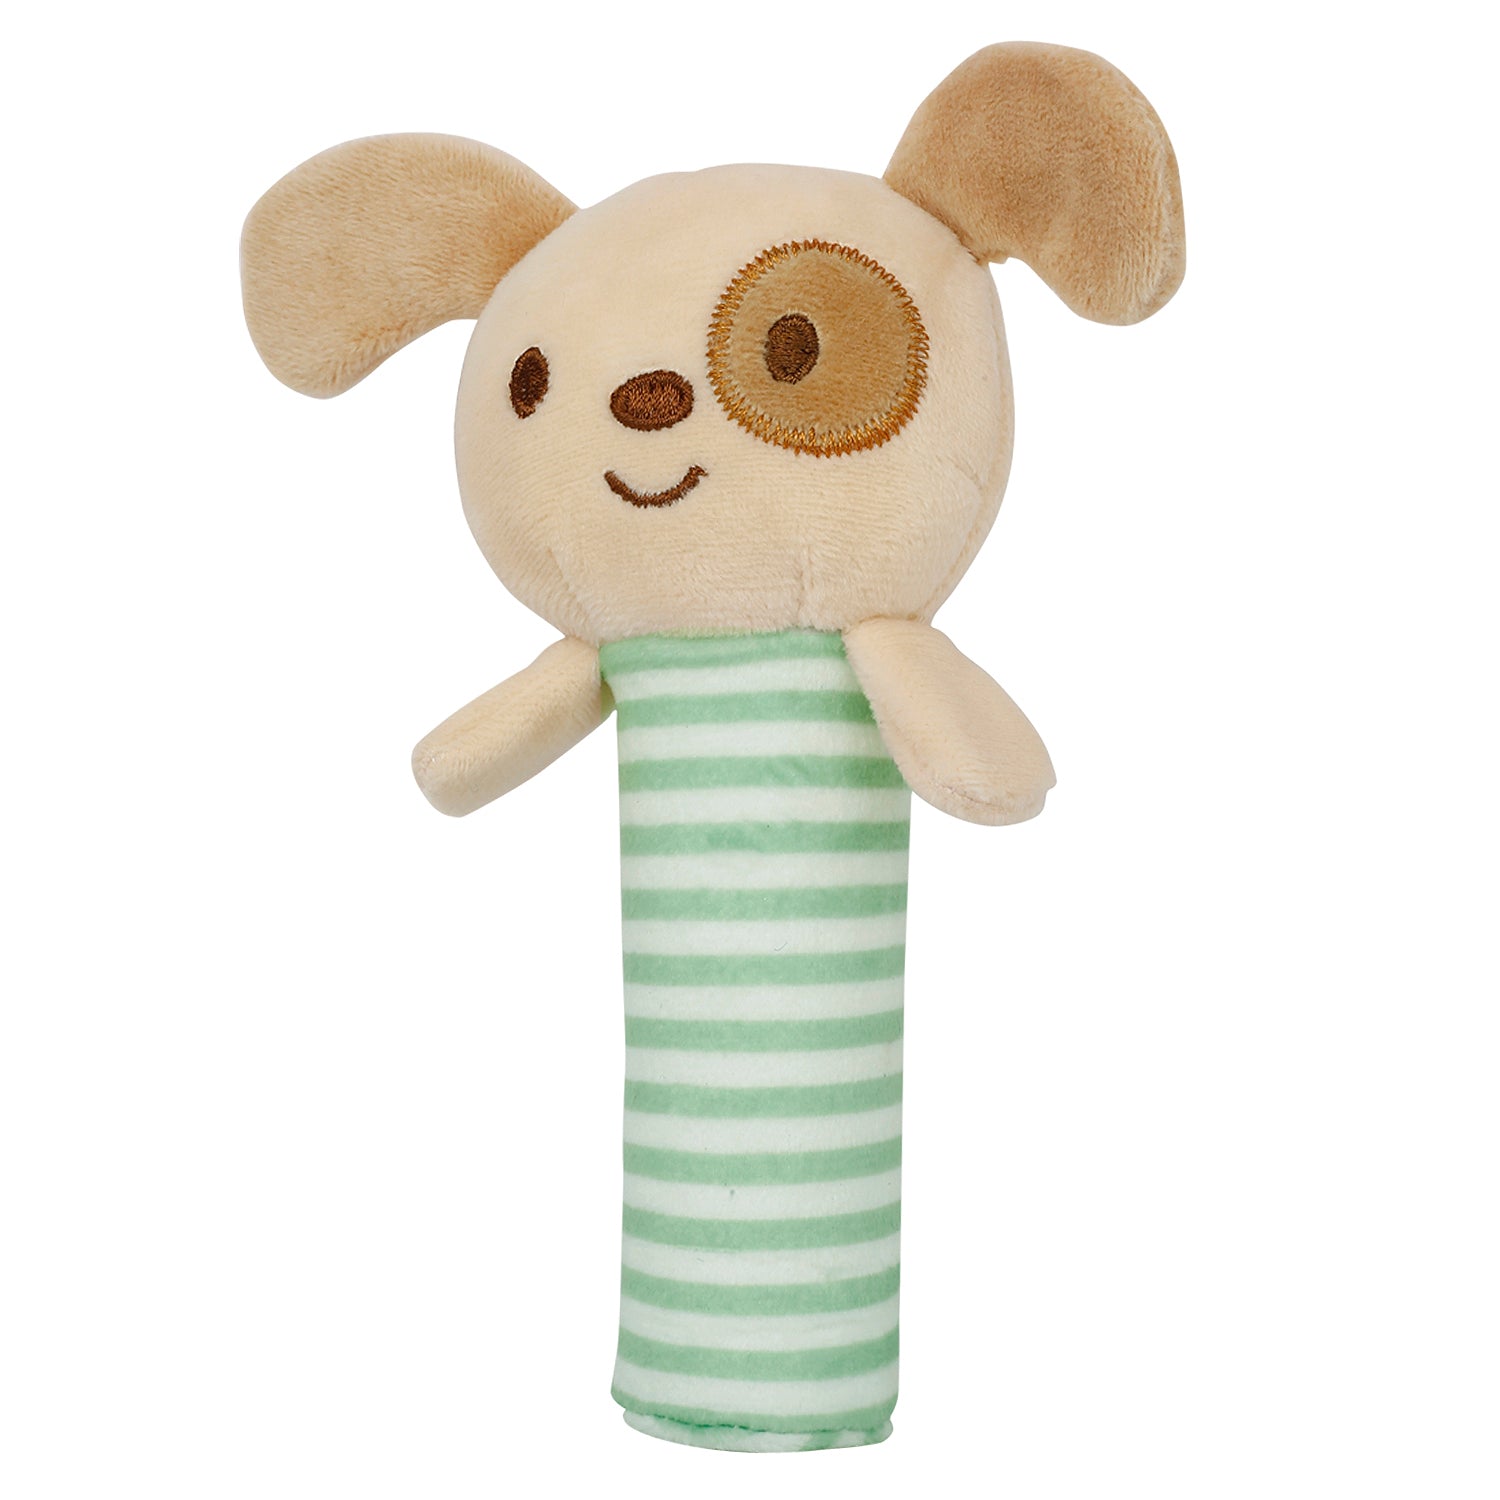 Puppy Love Brown Easy Grip Hand Rattle Toy - Baby Moo